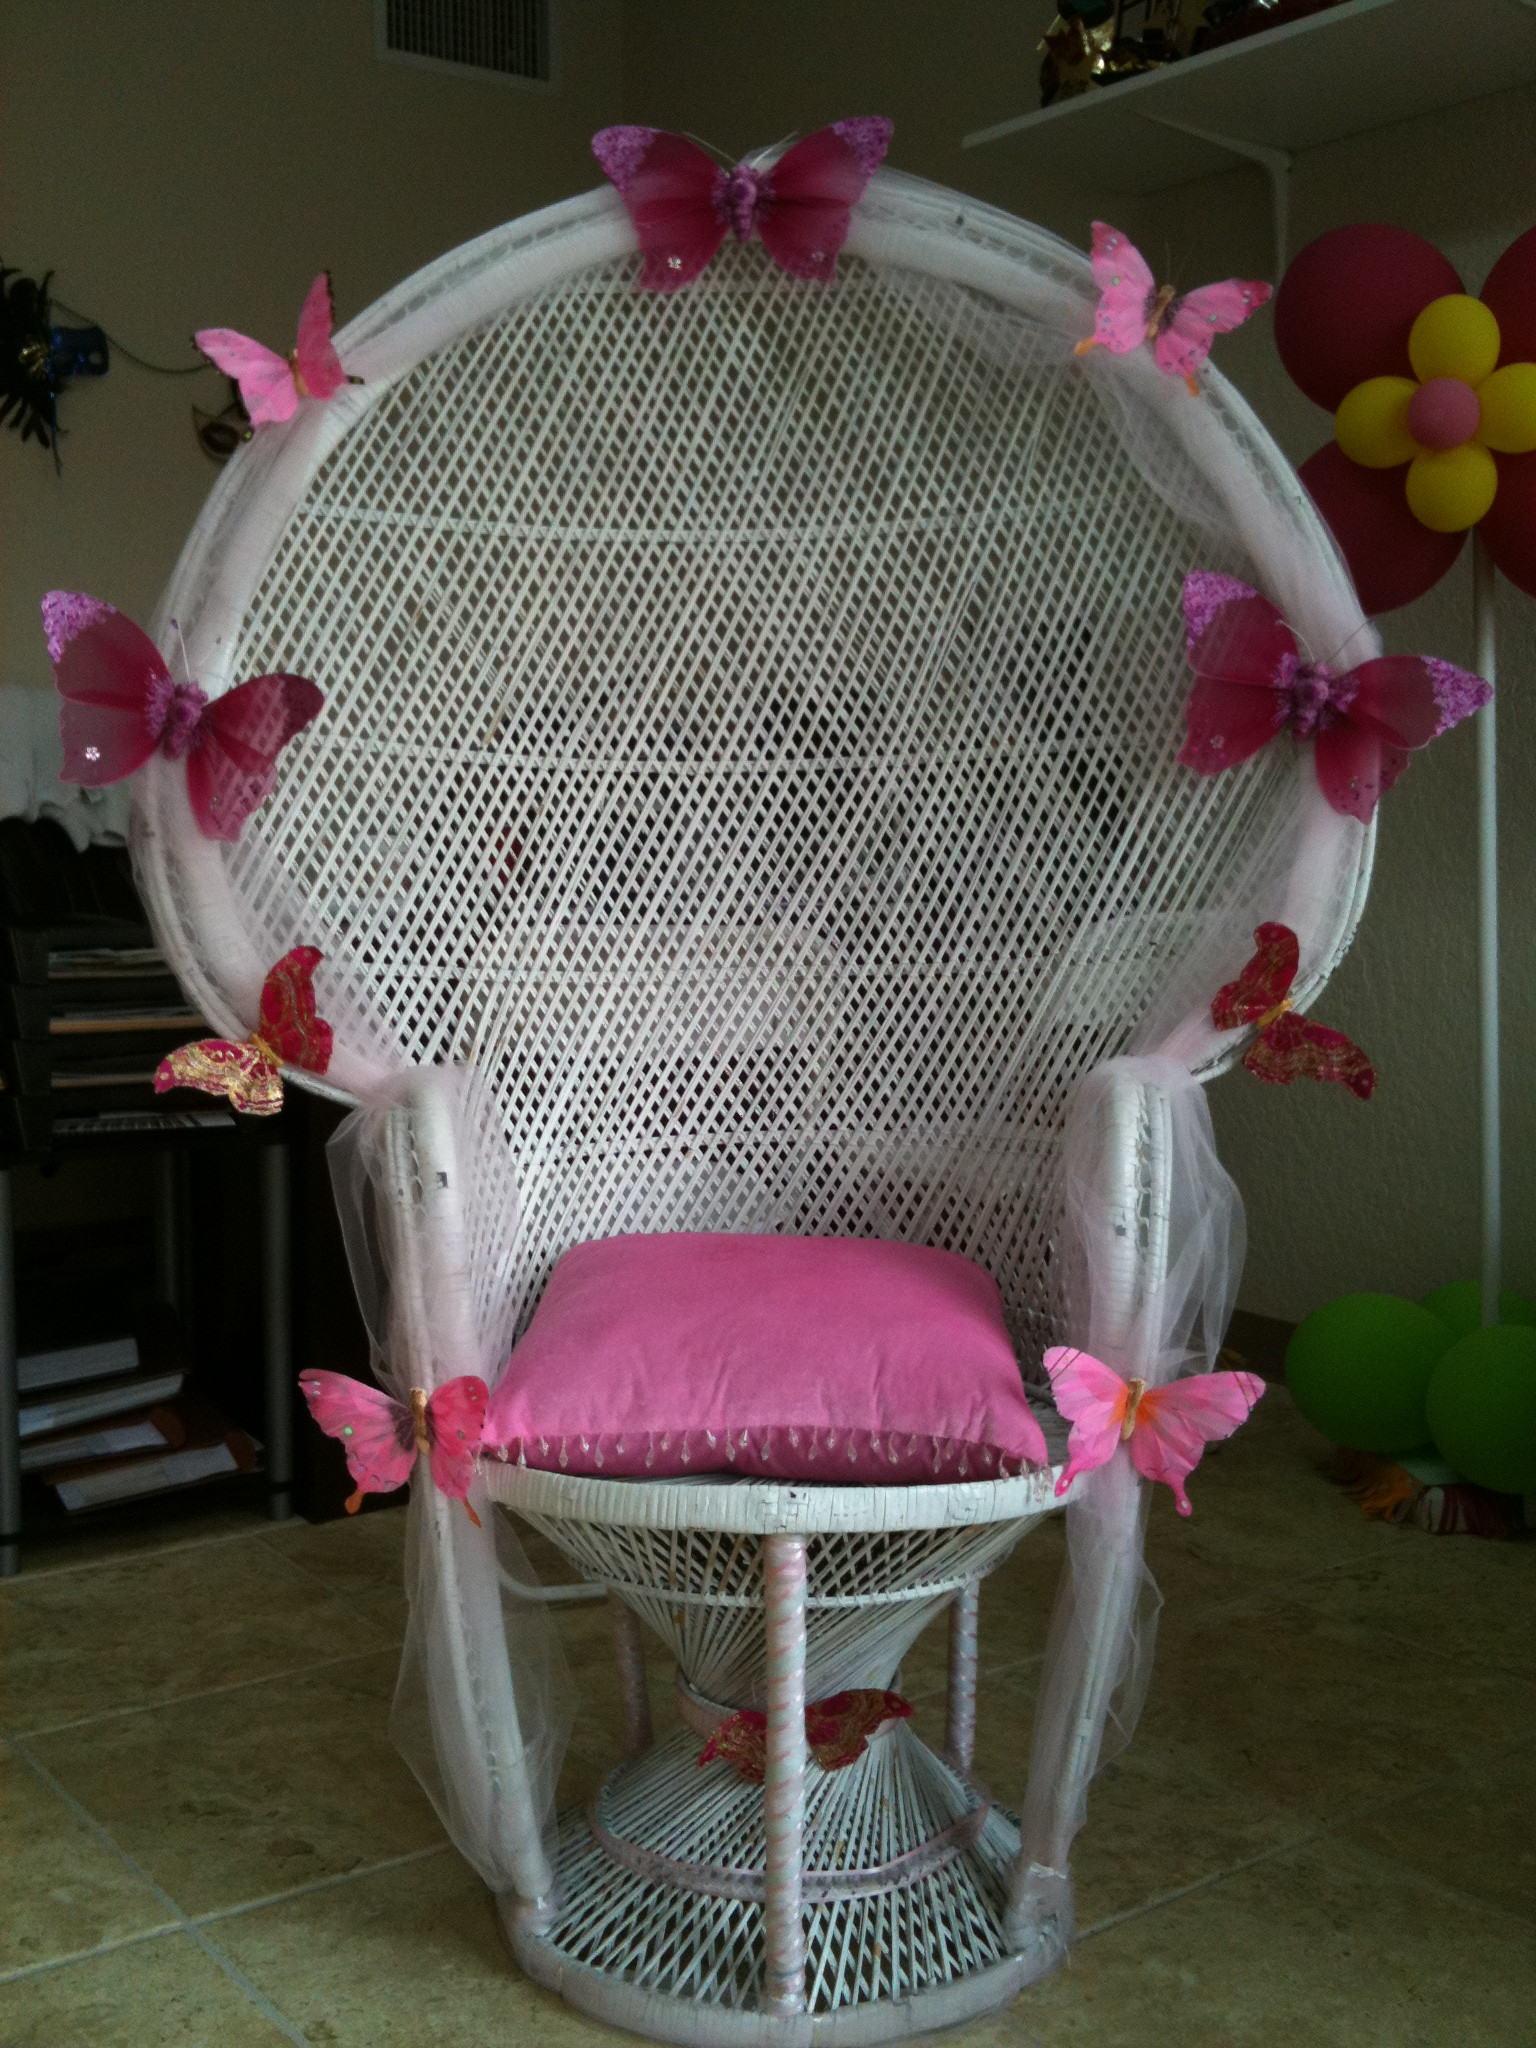 Baby Showers Decorations Ideas
 Decoration Ideas Baby Shower Mother s Chair